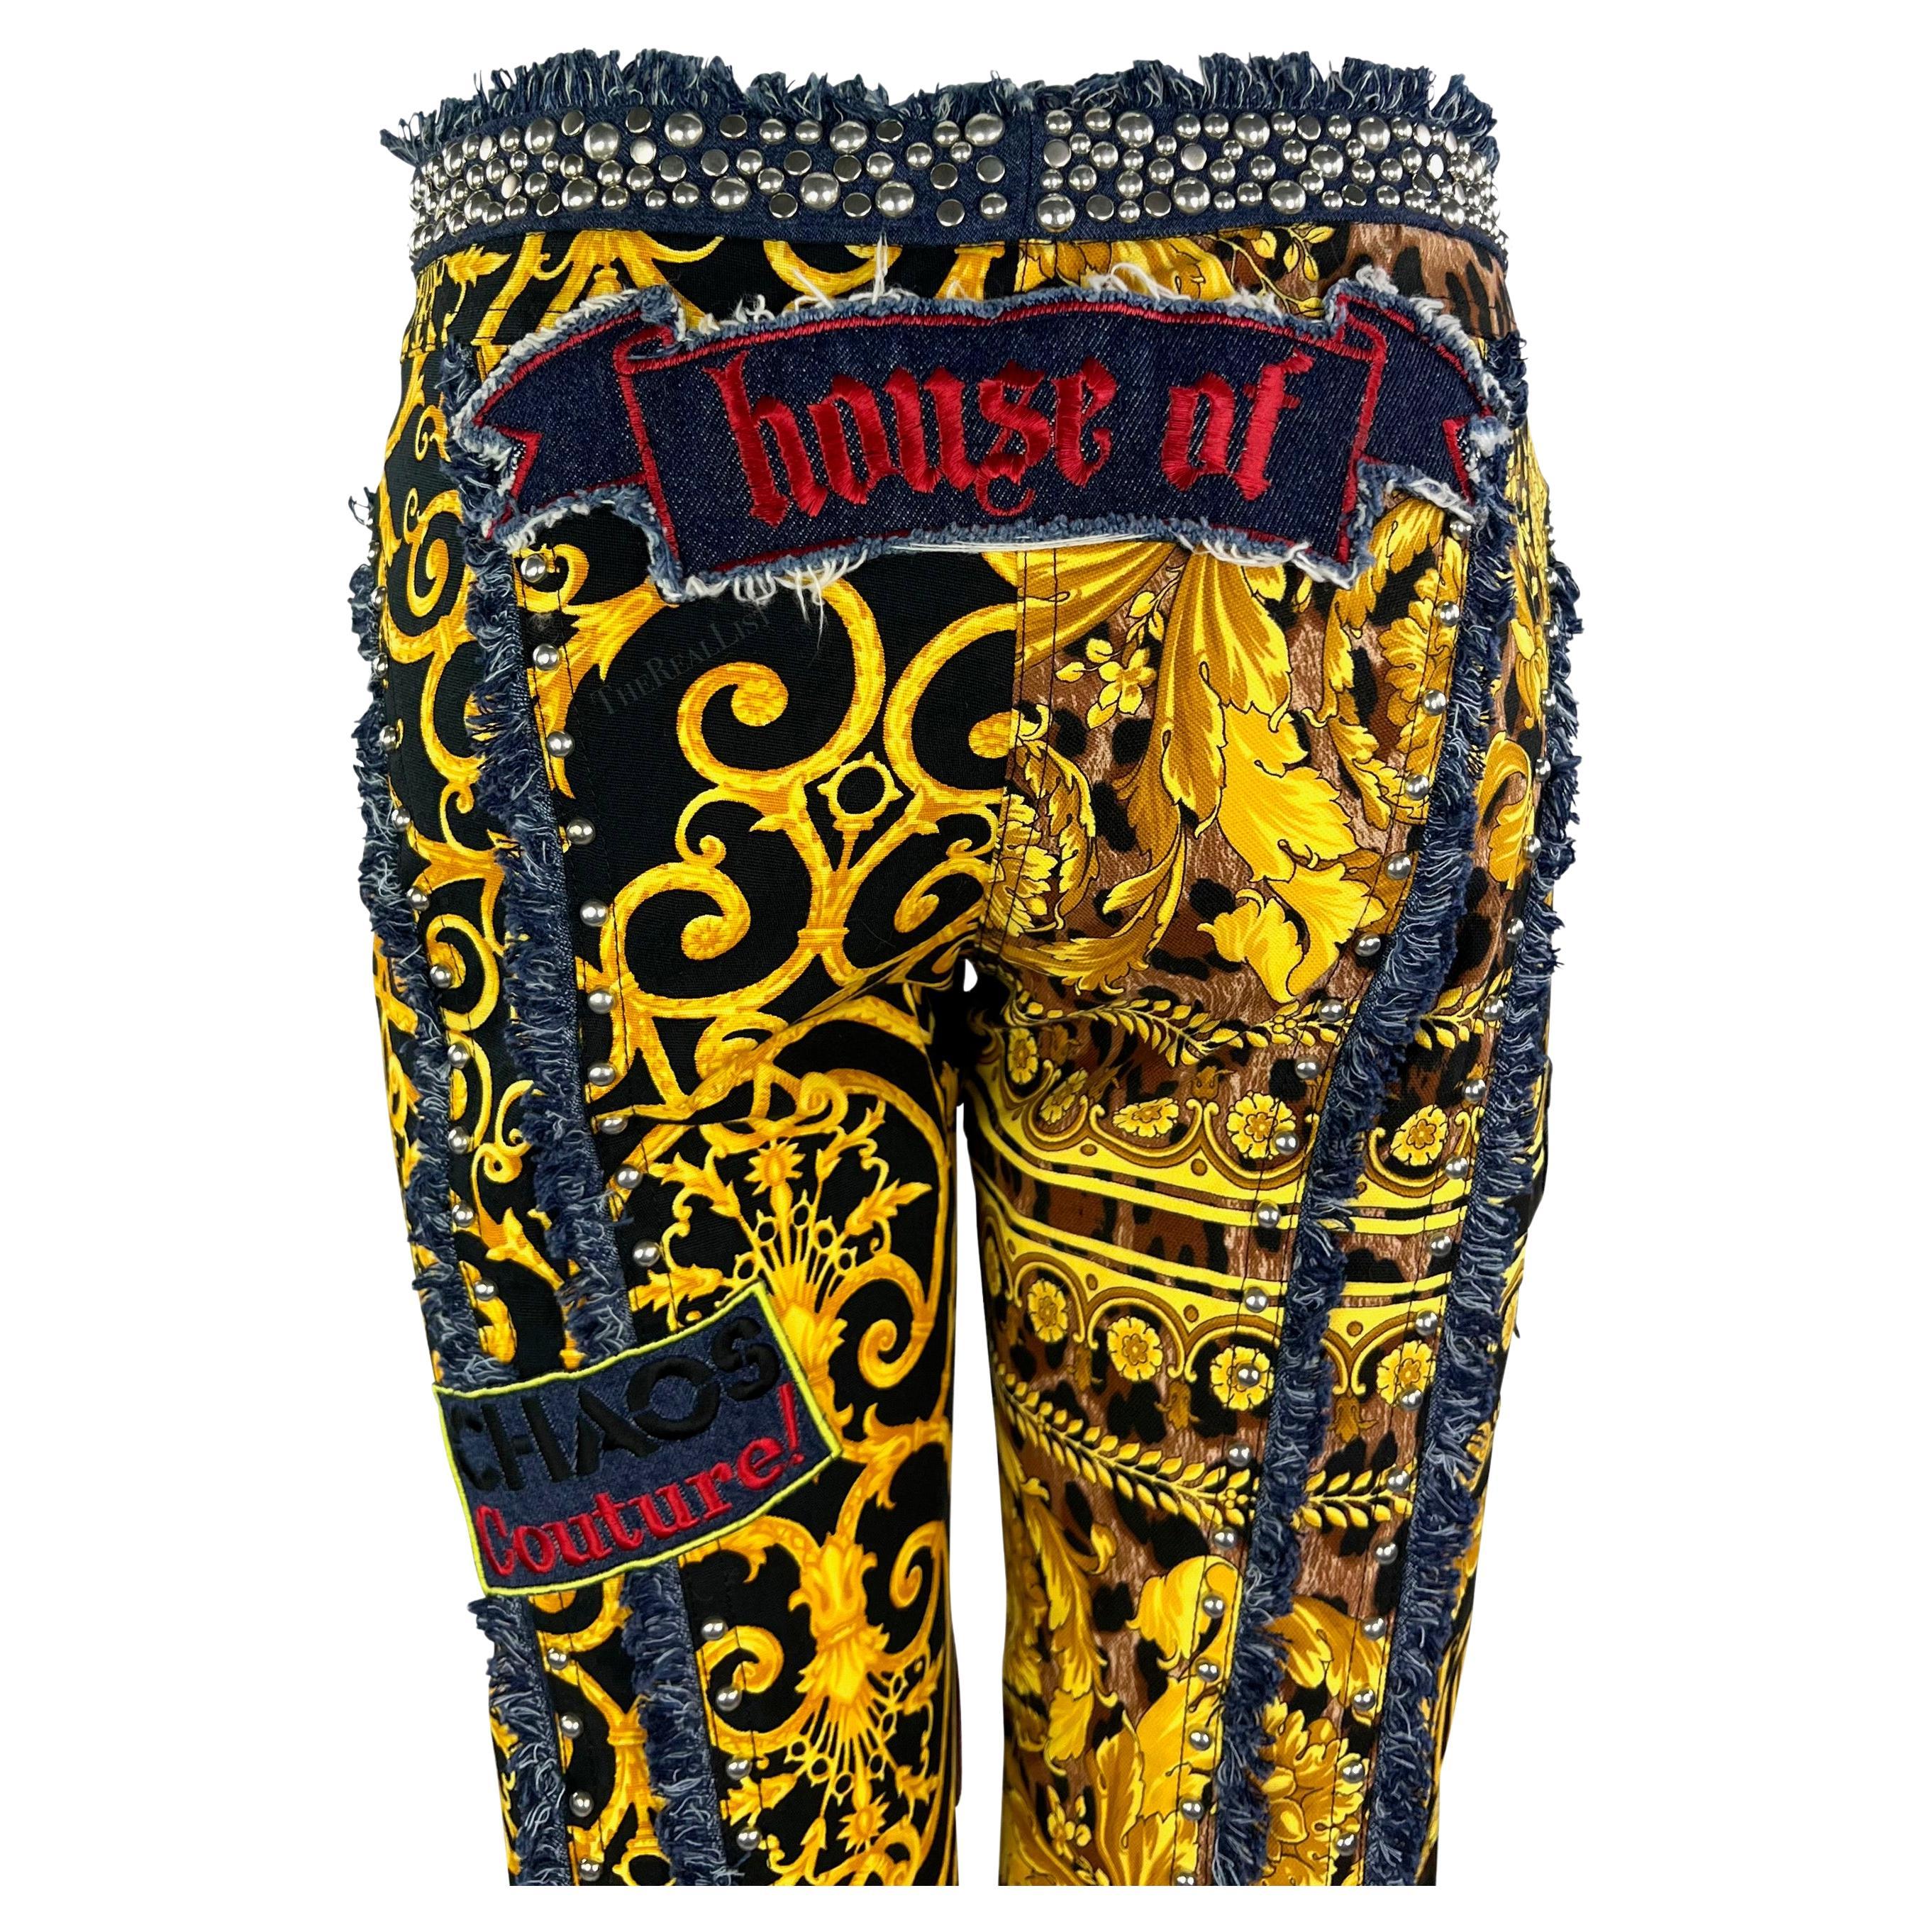 Presenting a pair of bold 'Chaos Couture' Versace jeans, designed by Donatella Versace. From the Spring/Summer 2005 collection, these jeans are covered in a yellow/gold baroque pattern, on one leg atop a cheetah print pattern. Covered in Choas